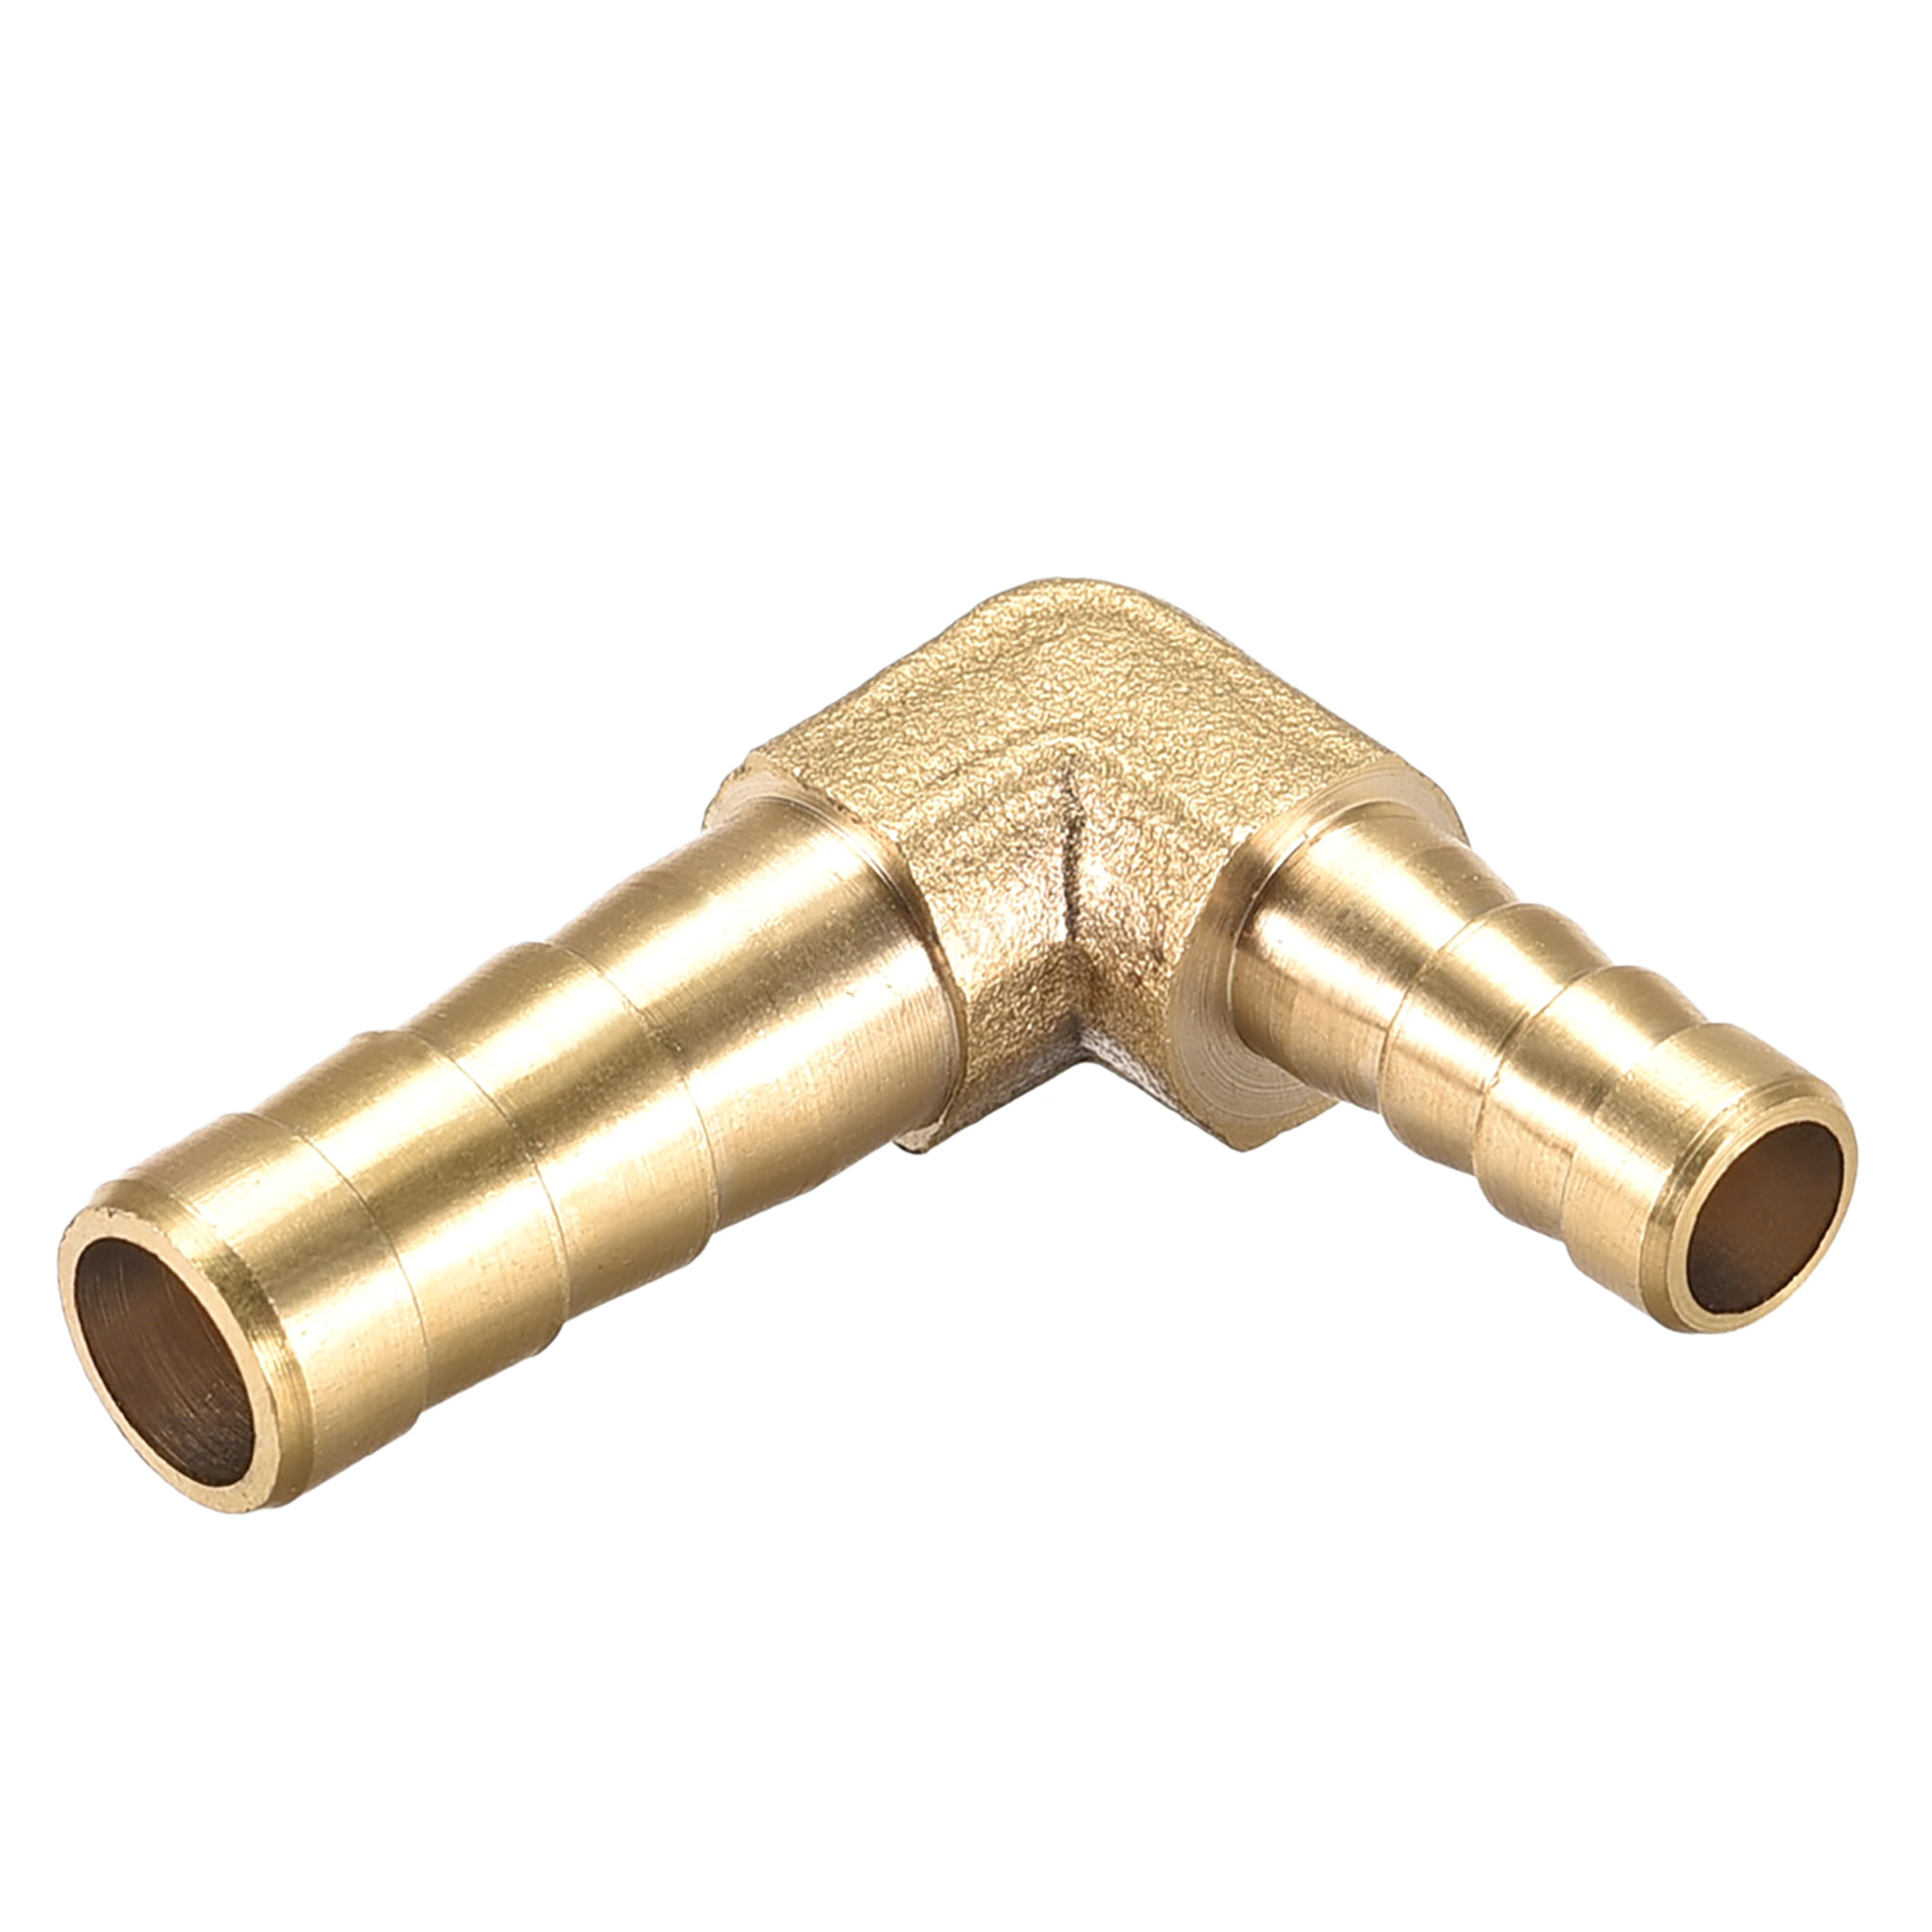 uxcell 12mm to 6mm Barb Brass Hose Fitting 90 Degree Elbow Pipe Connector Coupler Tubing Adapter 4pcs 